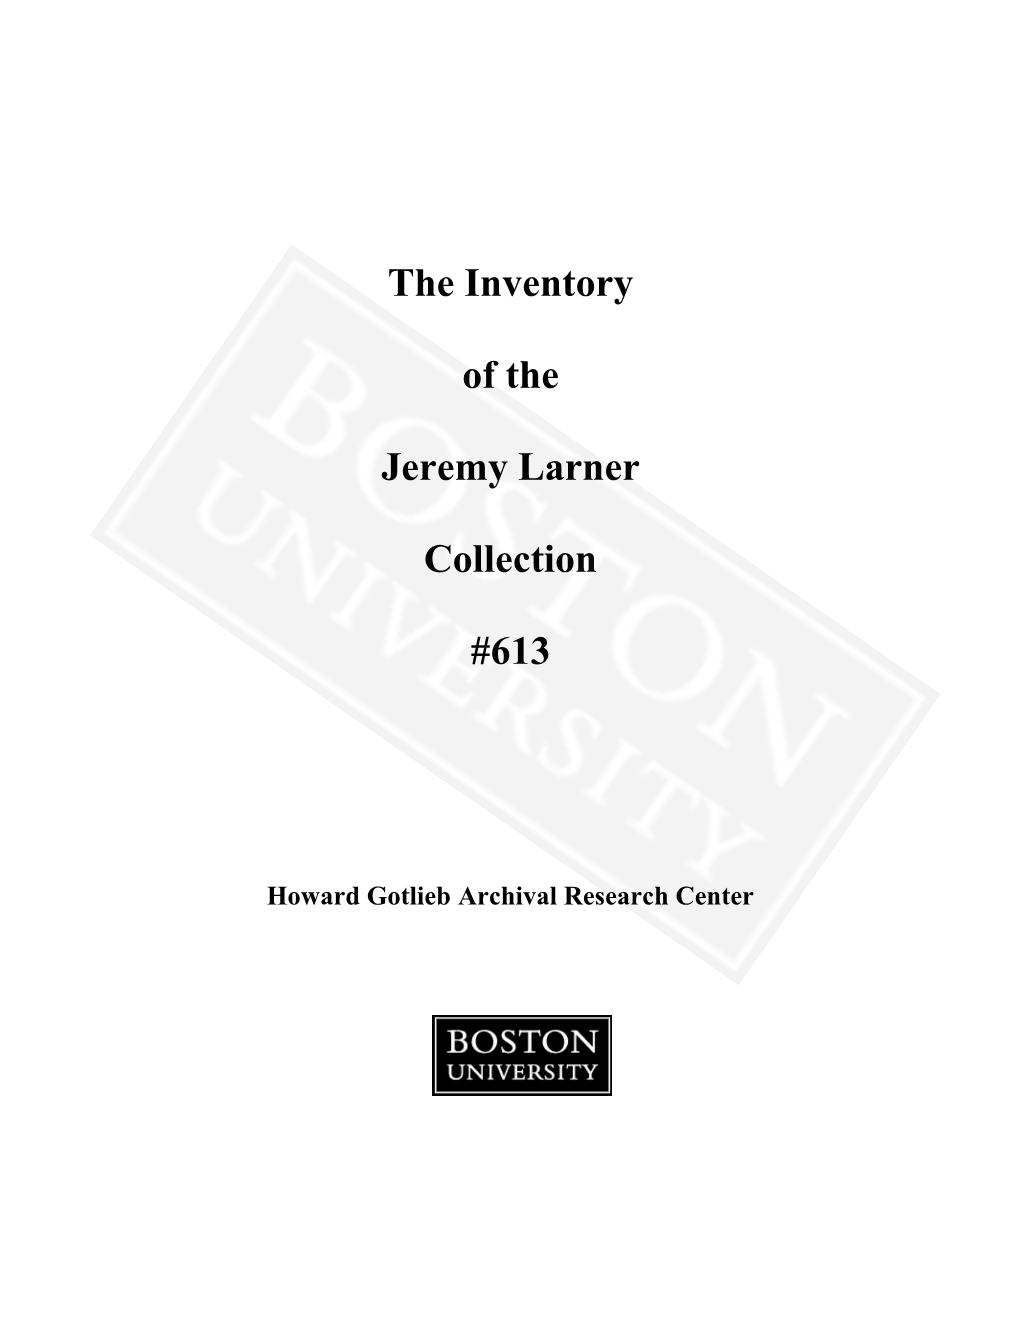 The Inventory of the Jeremy Larner Collection #613